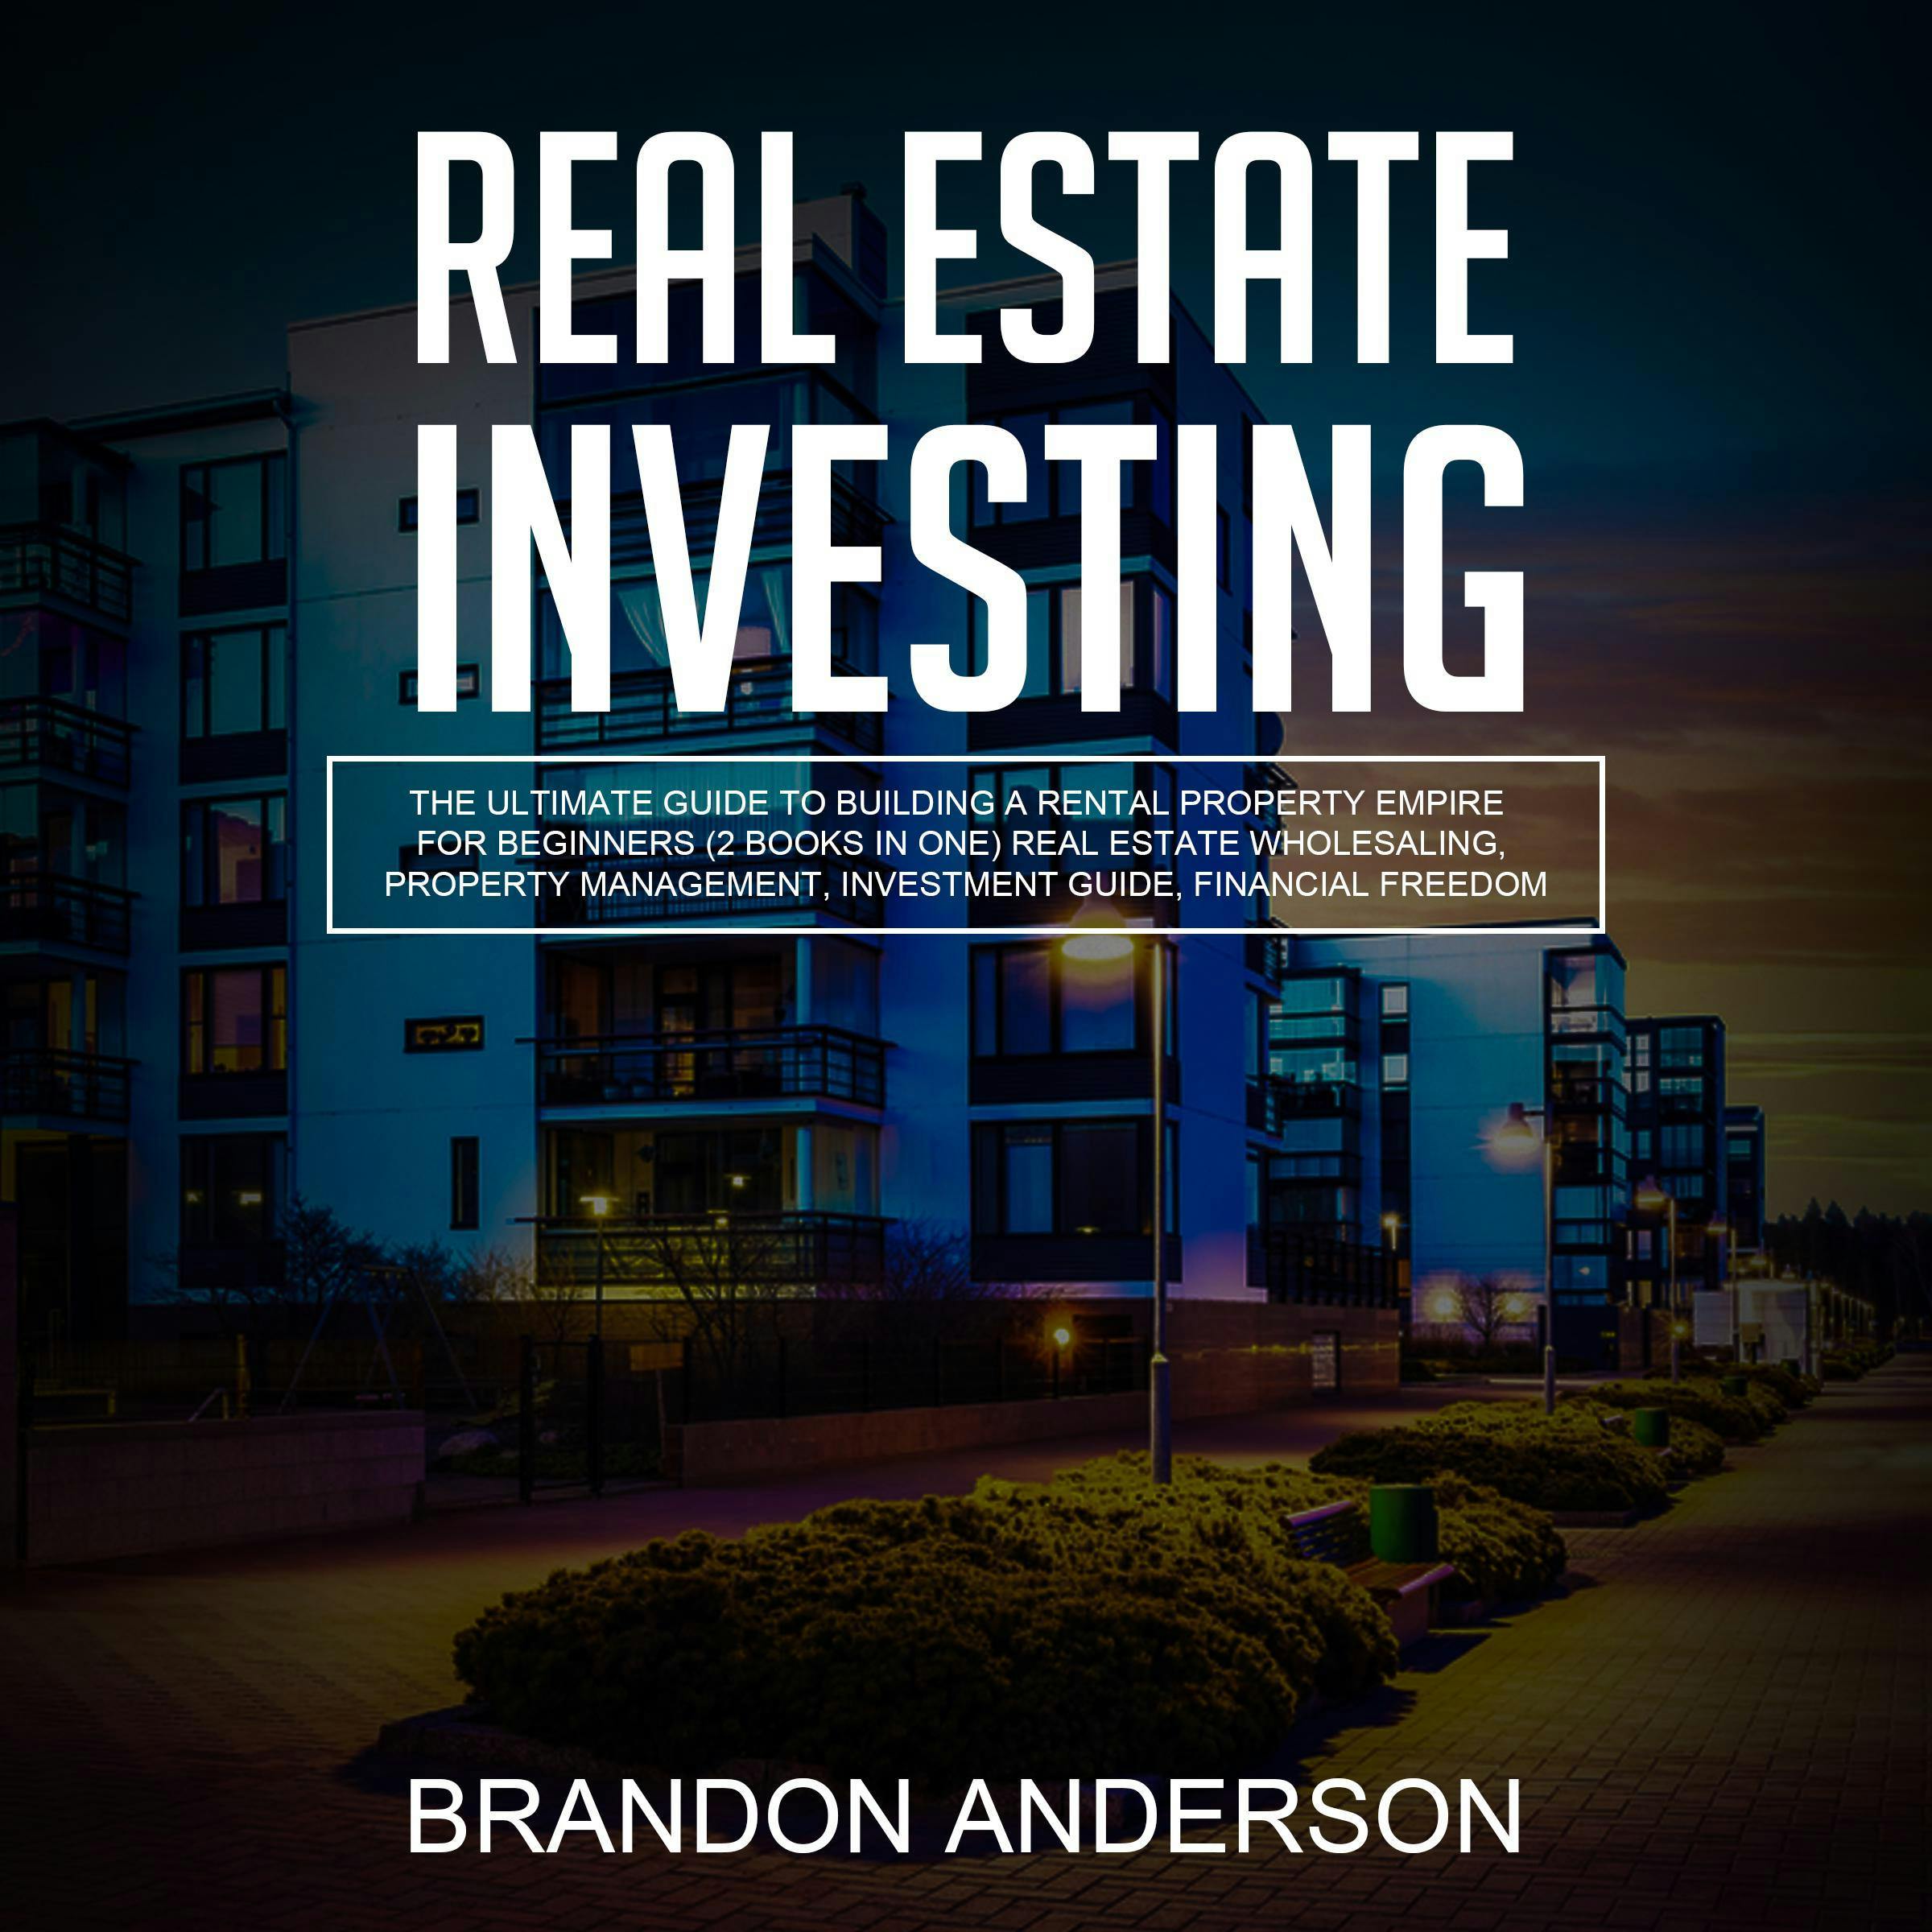 Real Estate Investing: The Ultimate Guide to Building a Rental Property Empire for Beginners (2 Books in One) Real Estate Wholesaling, Property Management, Investment Guide, Financial Freedom - Brandon Anderson